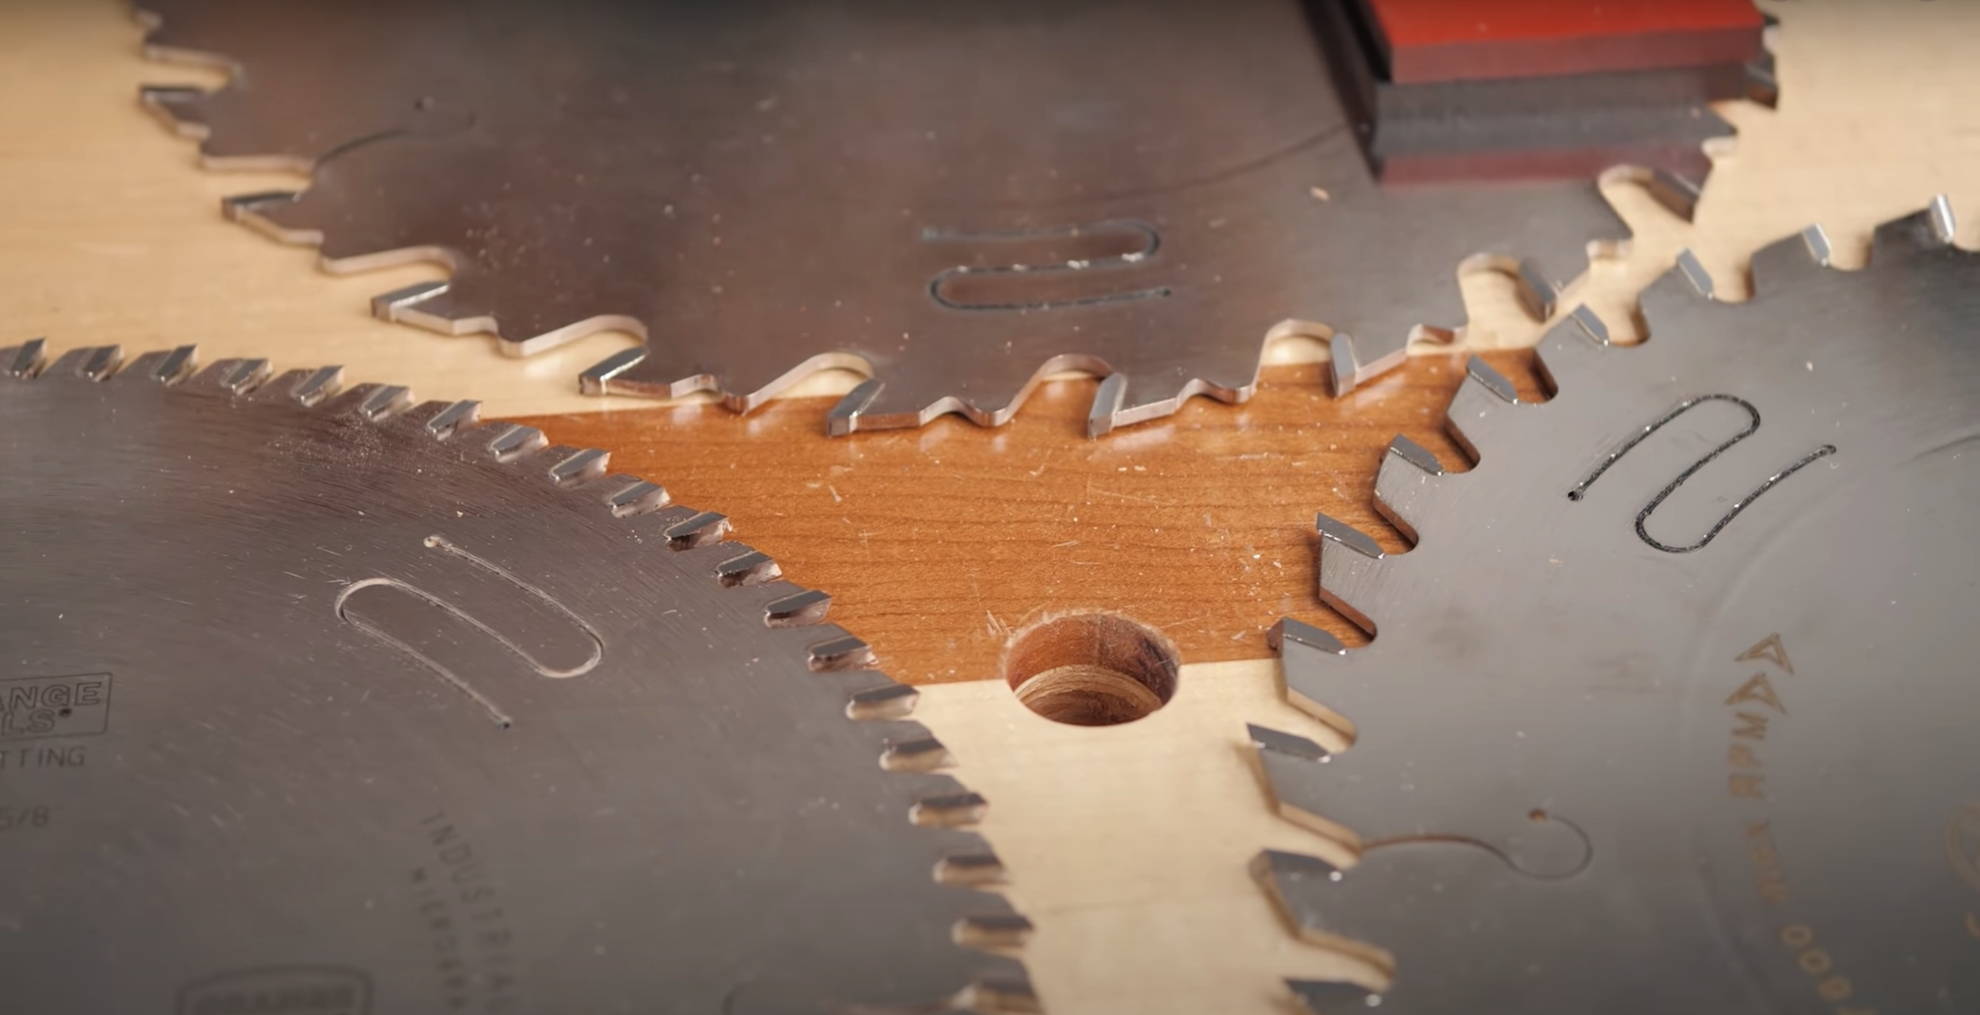 A crosscut, general purpose, and ripping saw blade